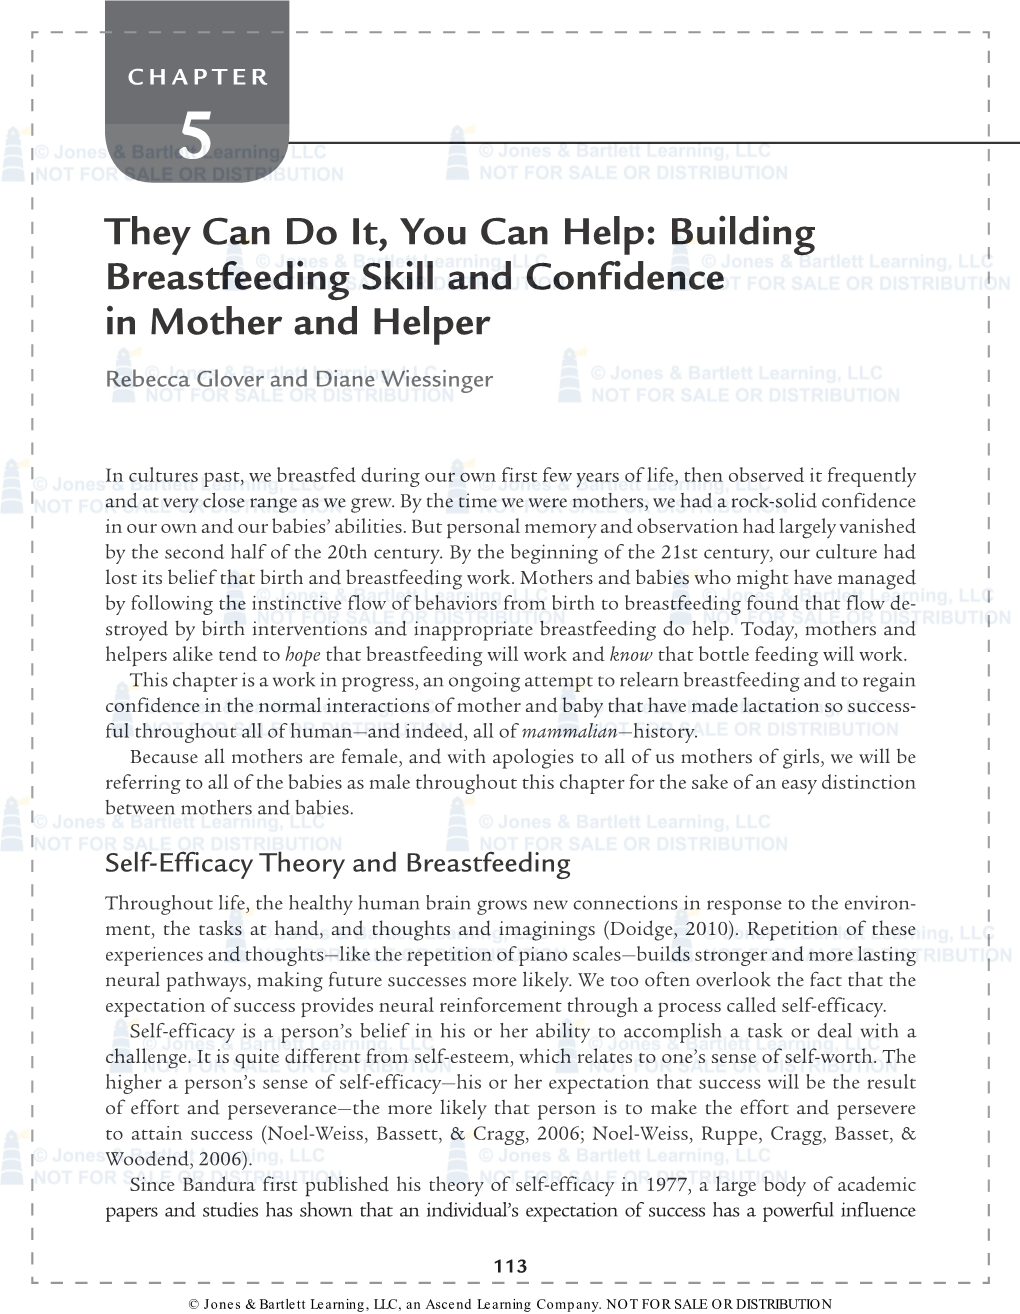 They Can Do It, You Can Help: Building Breastfeeding Skill and Confidence in Mother and Helper Rebecca Glover and Diane Wiessinger